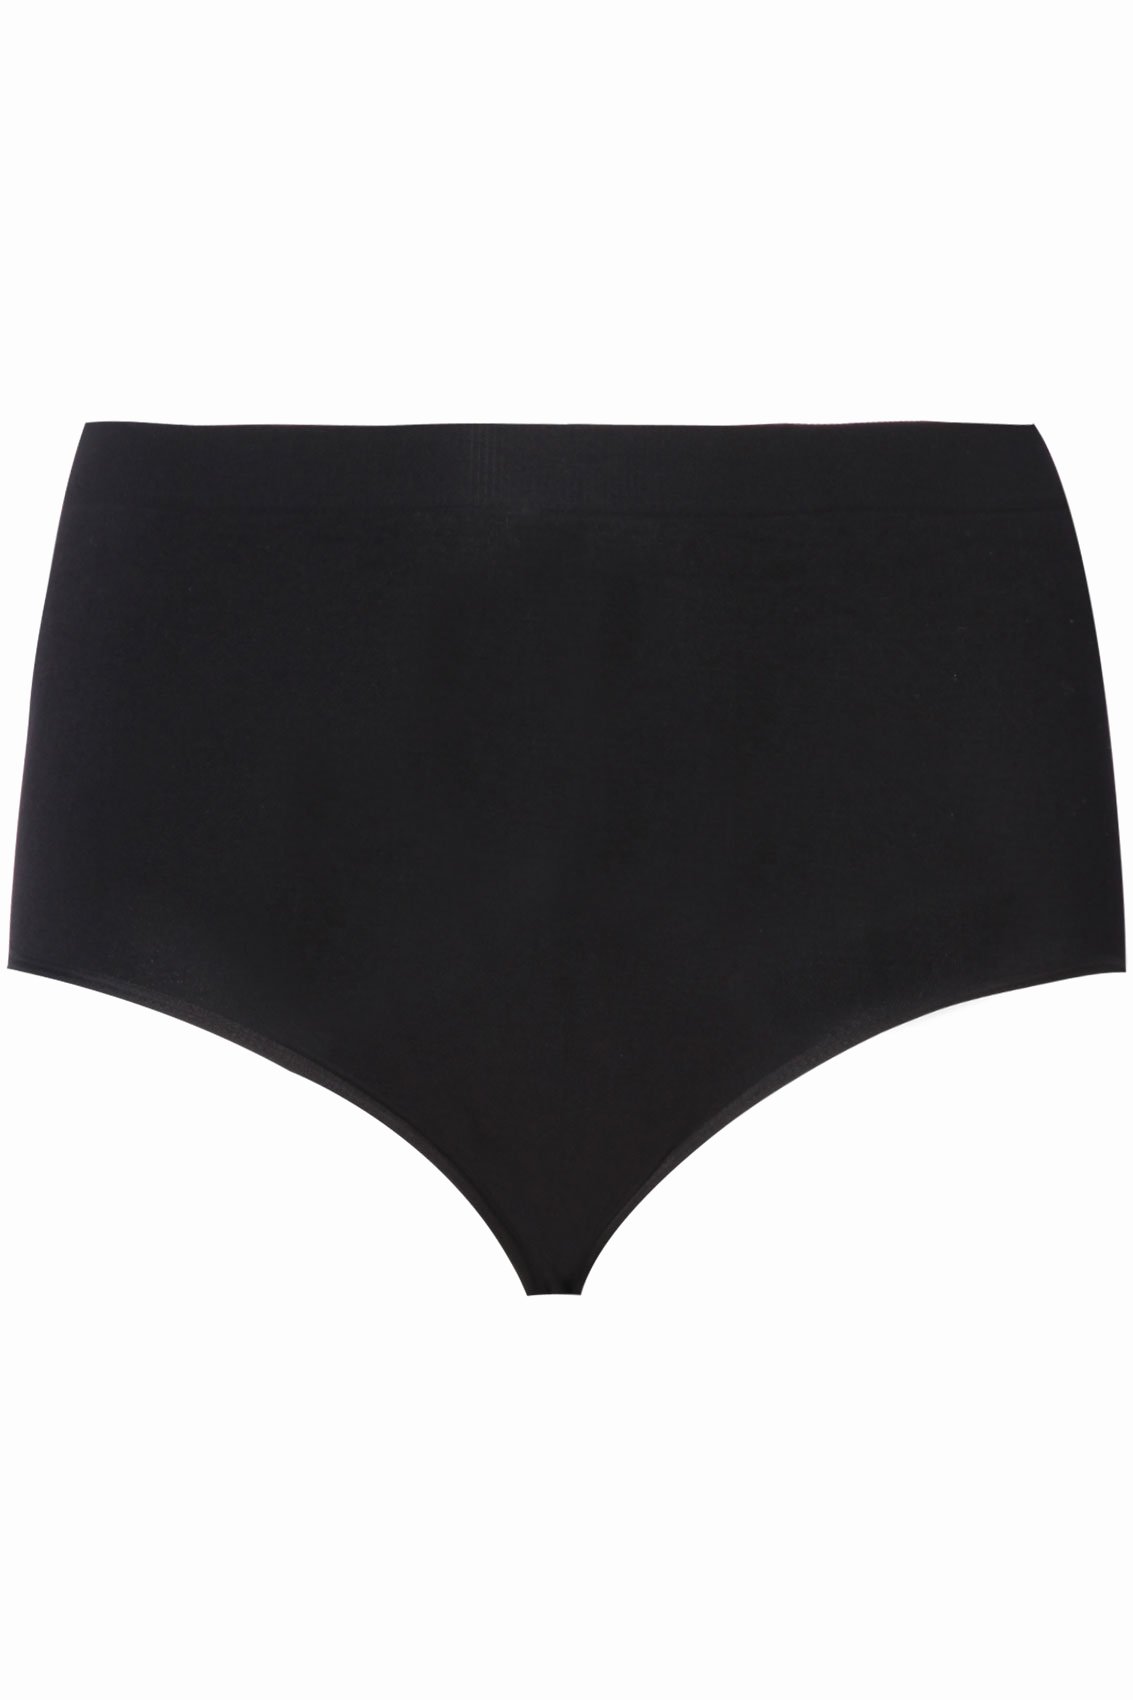 No Refund Policy Template Lovely Black Seamless Light Control Brief Plus Size 16 to 28